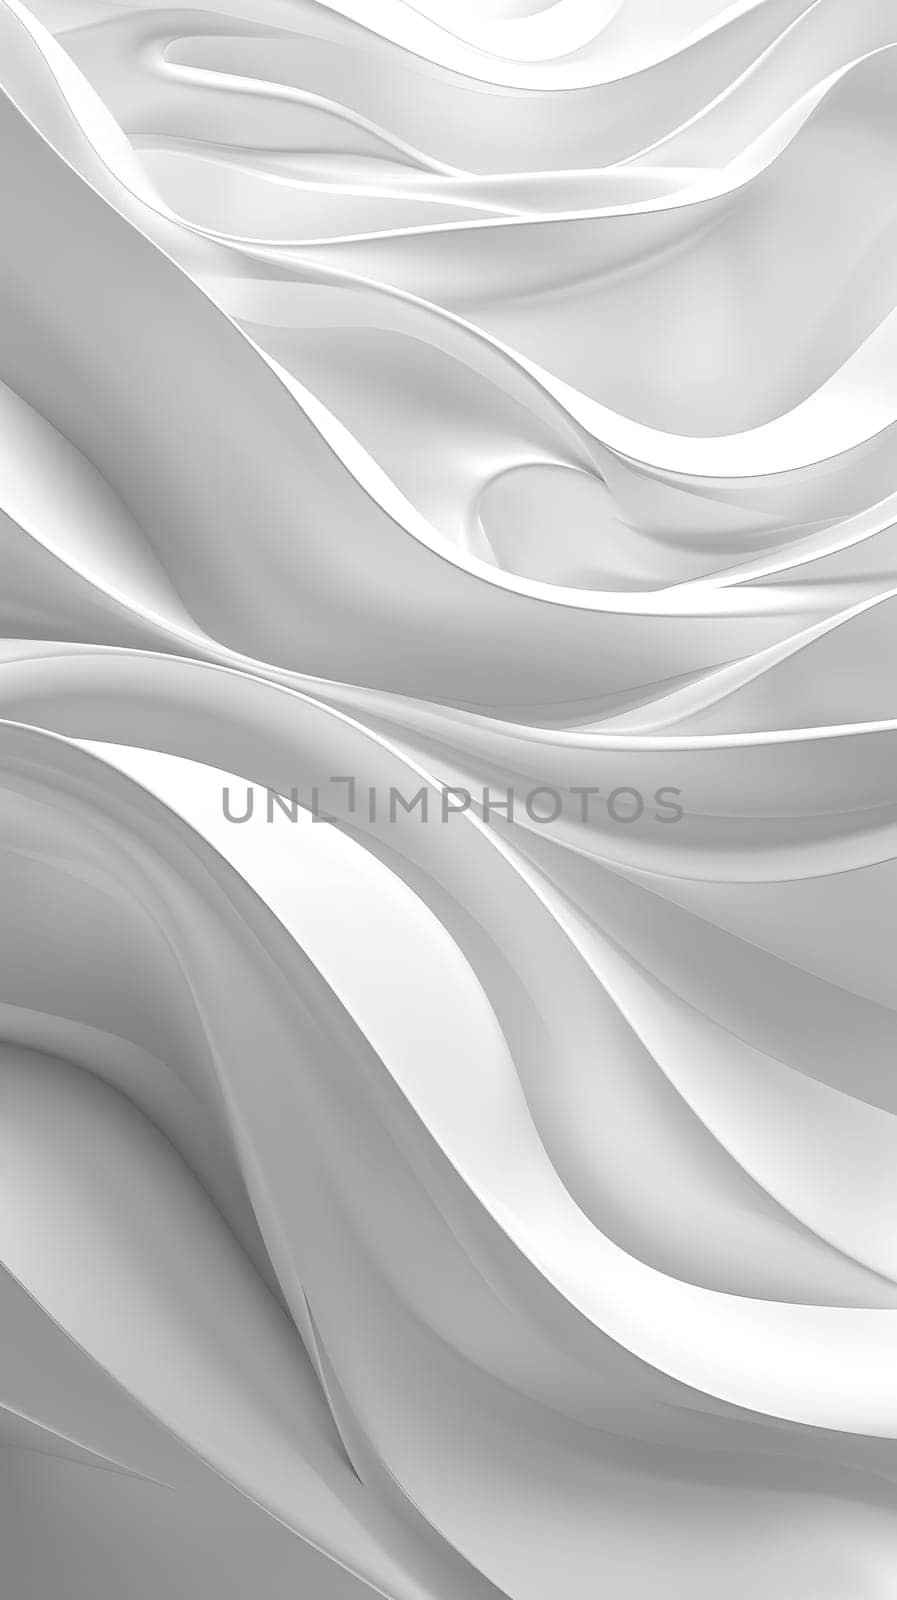 A closeup image capturing the beauty of a liquid white wave on a white background. The grey tones create a mesmerizing automotive design, resembling a silk petal pattern in monochrome photography